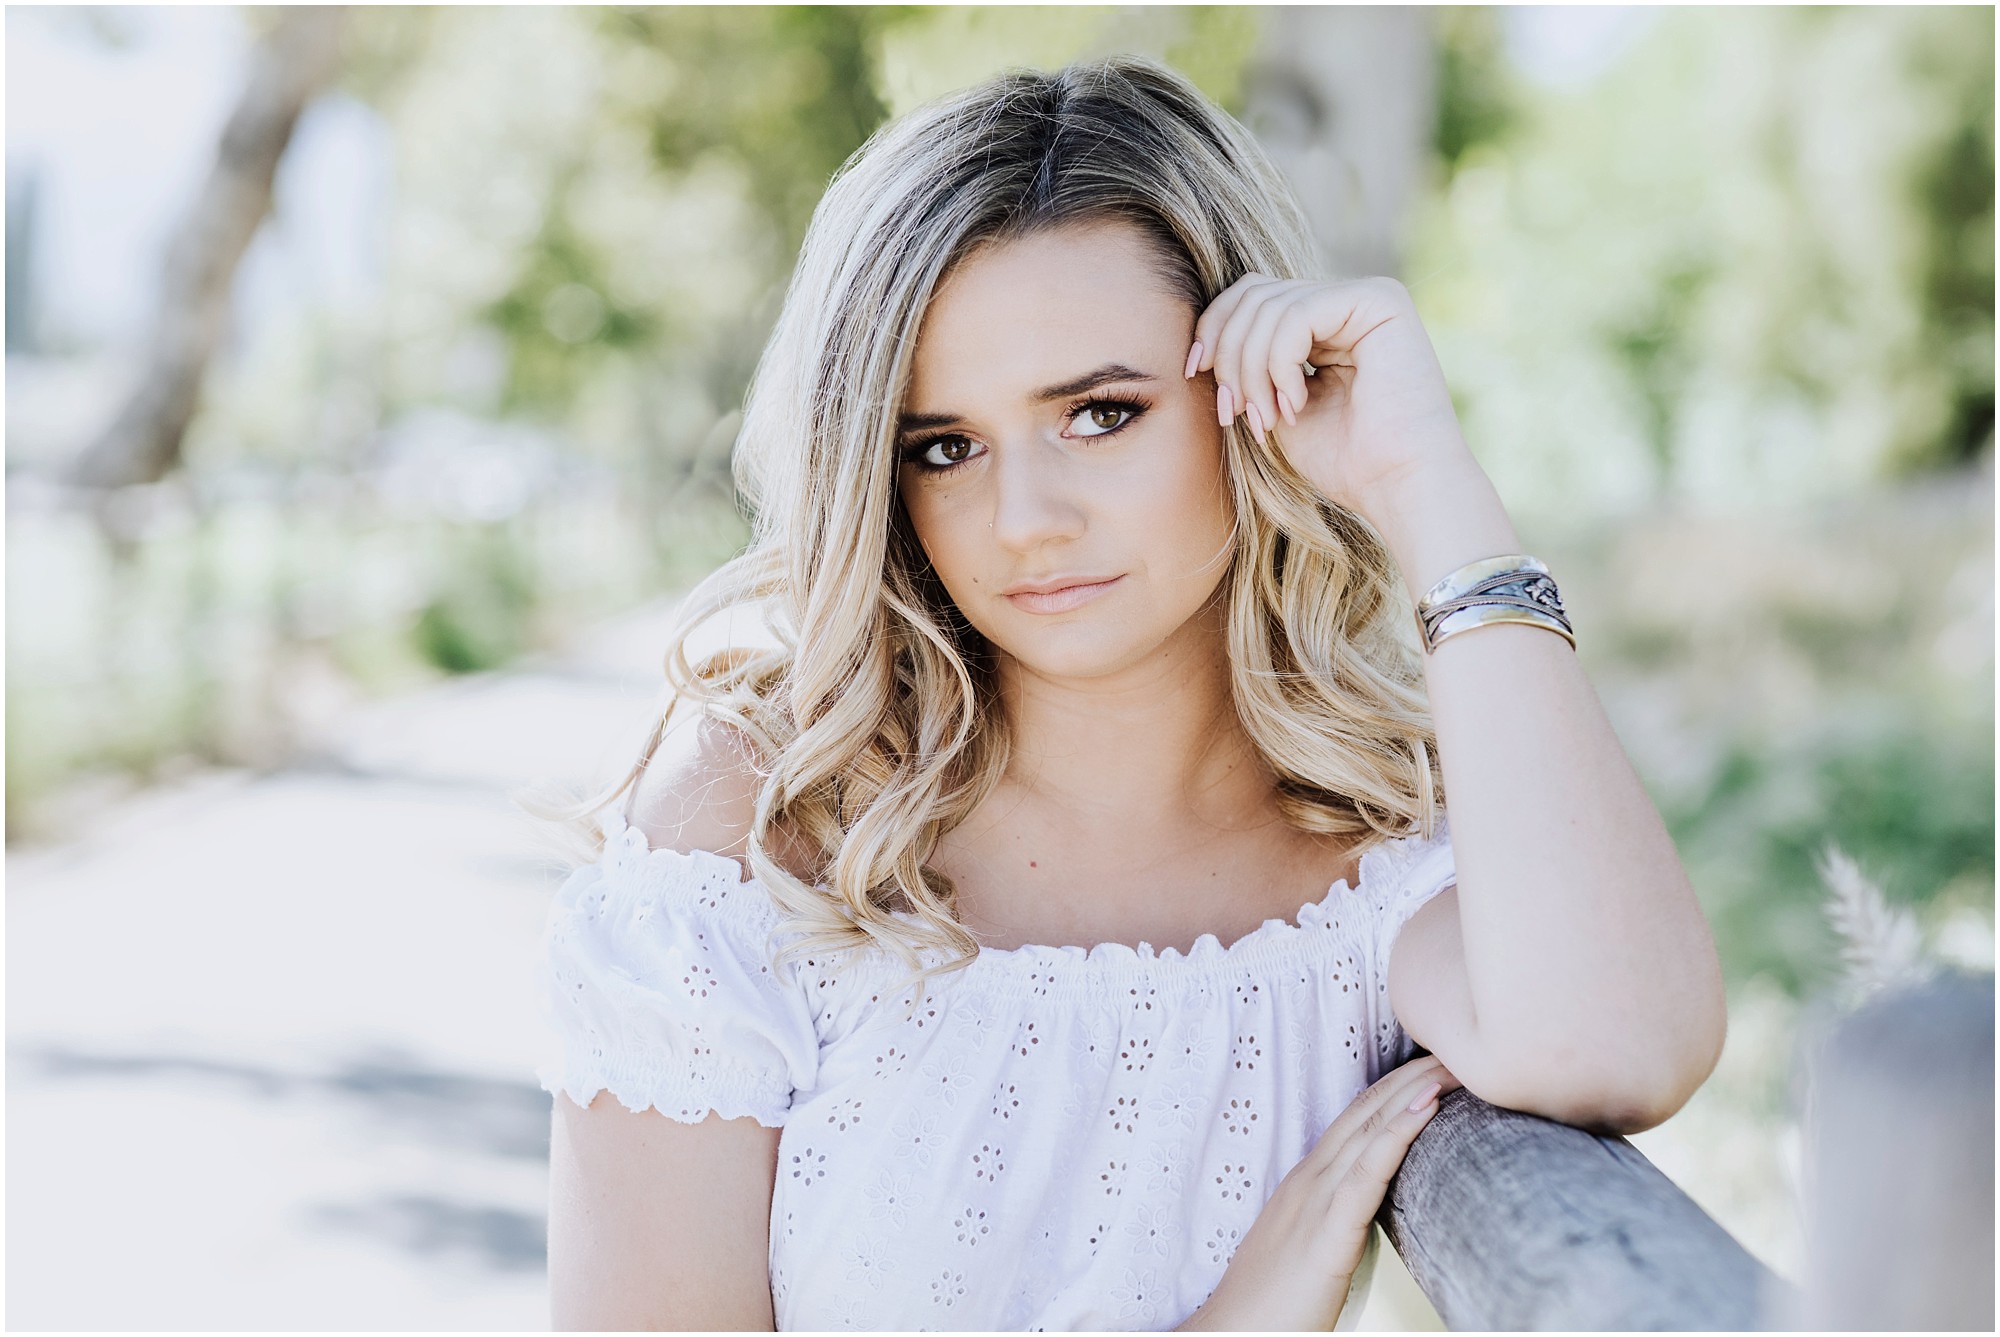 super simple and natural senior portraits done by professional southern california photographer tara rochelle